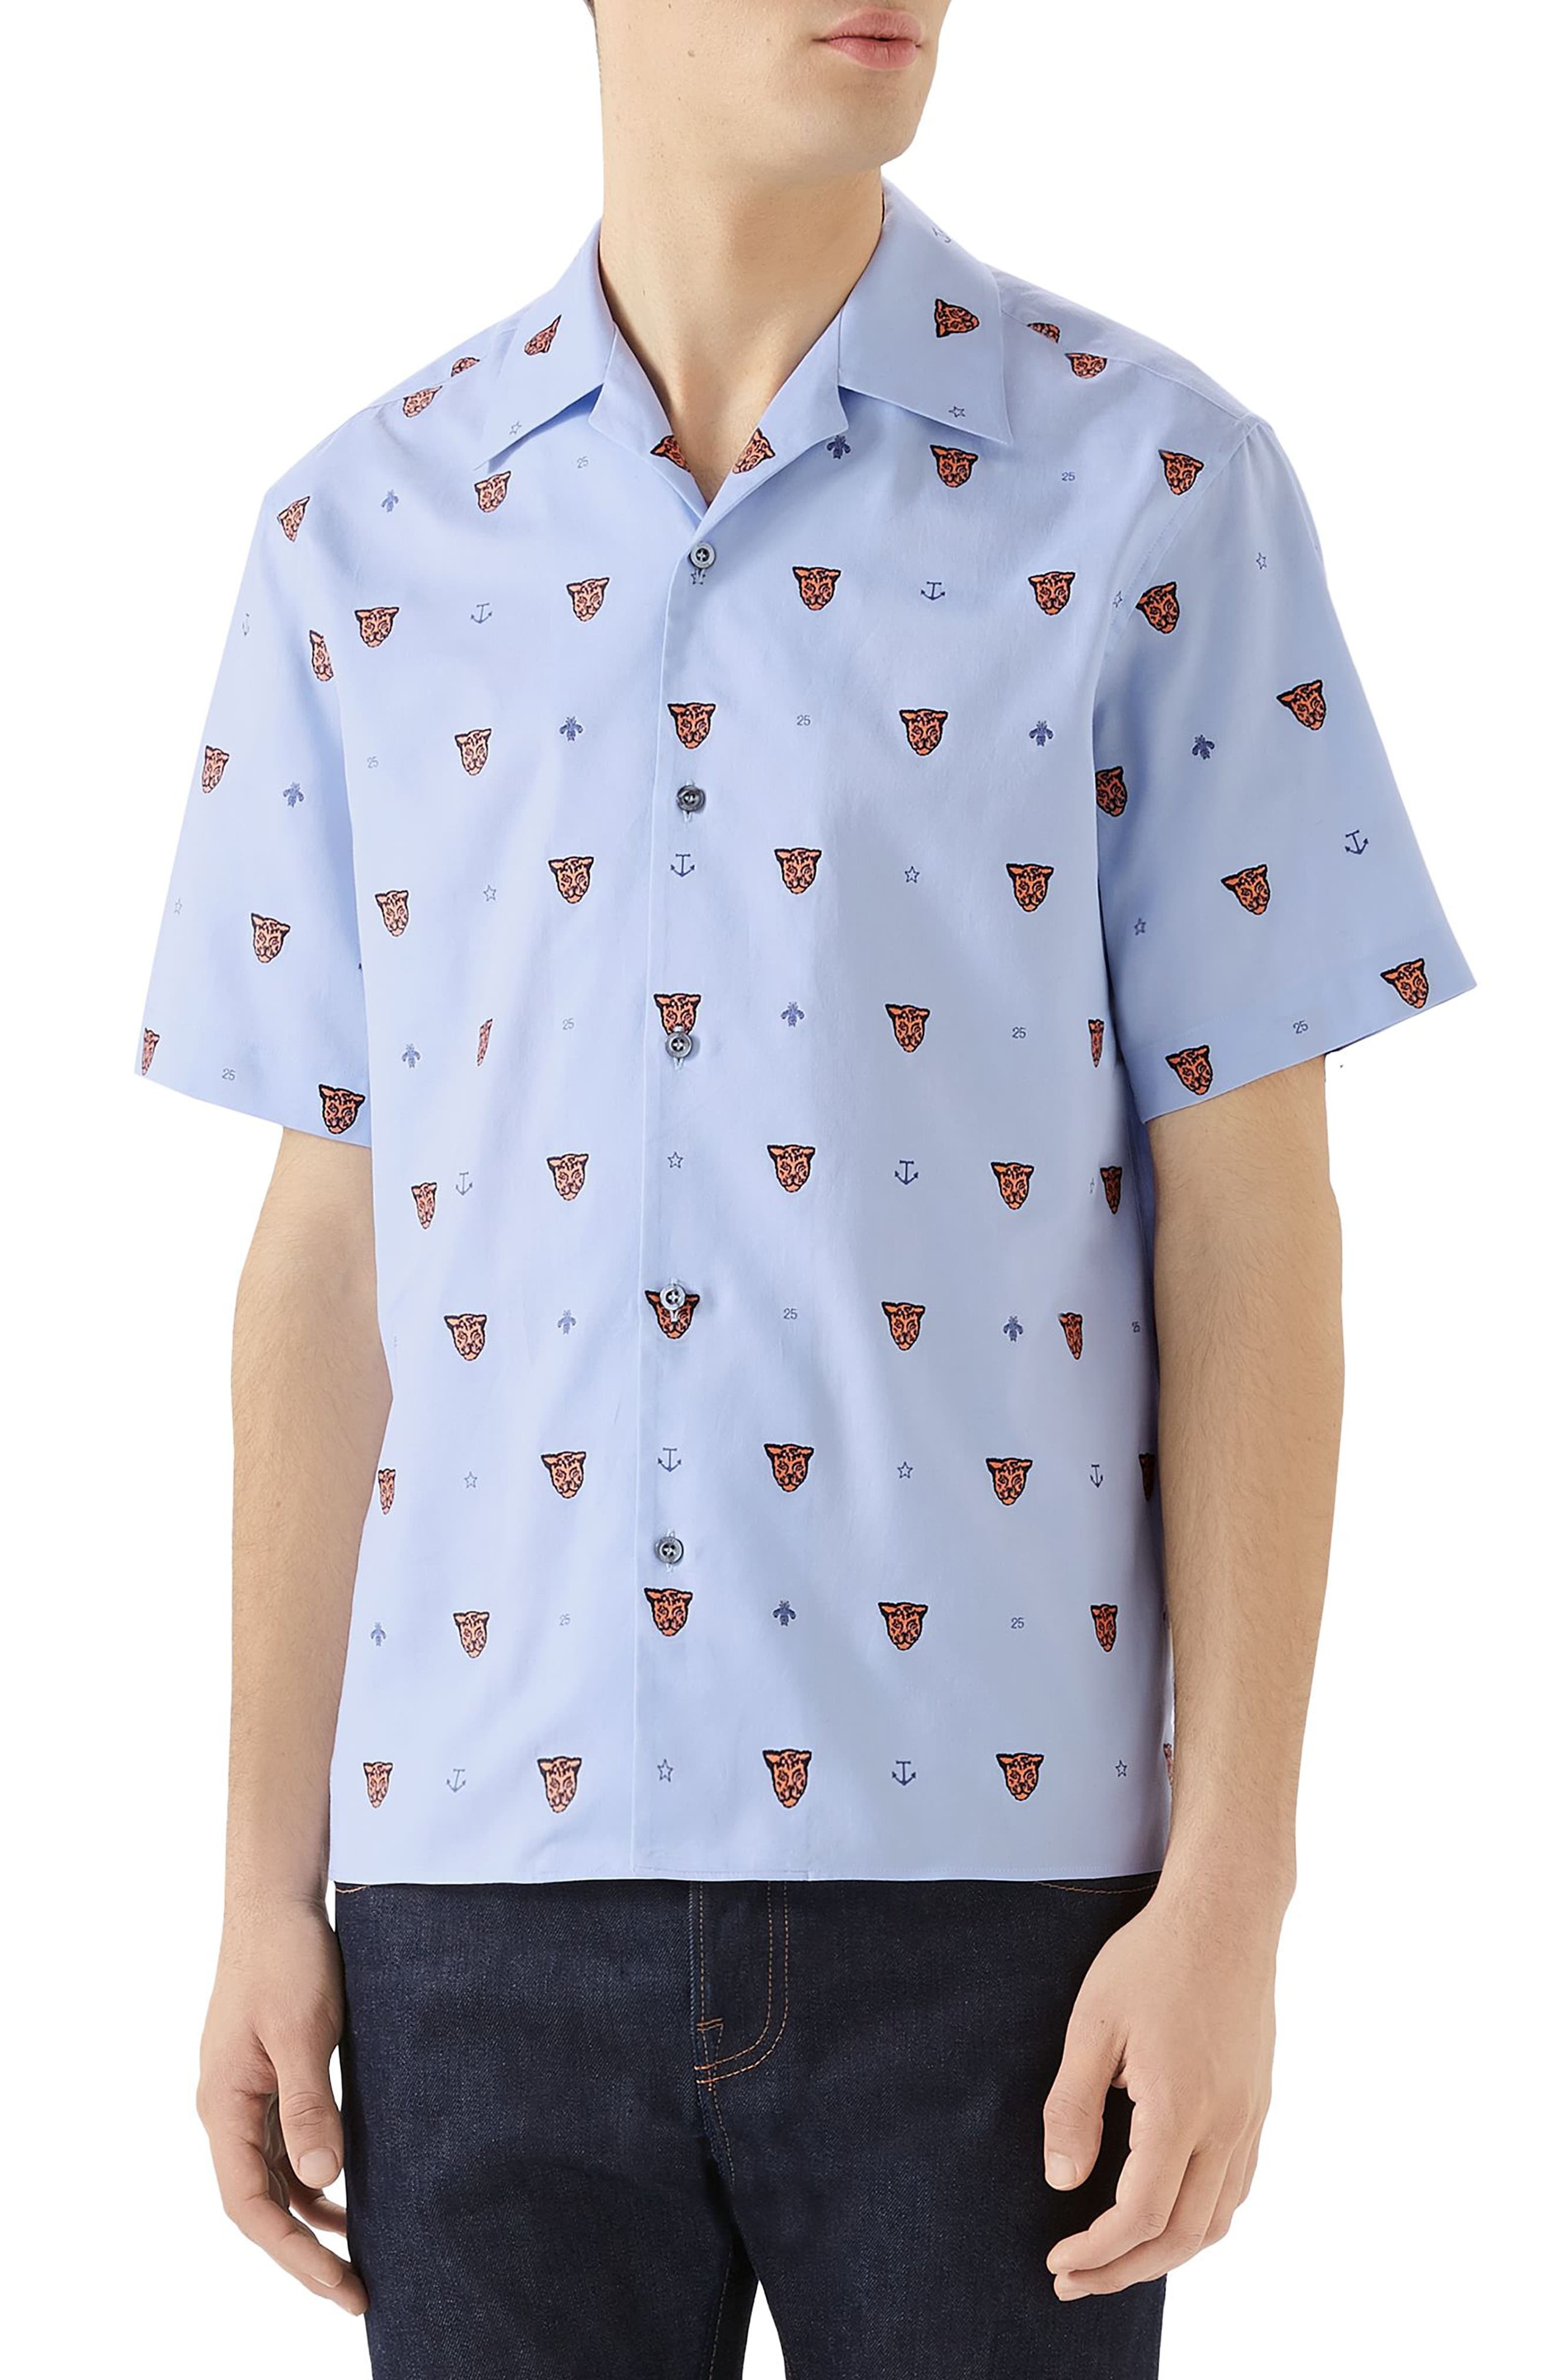 Gucci Tiger bowling shirt in ivory and blue